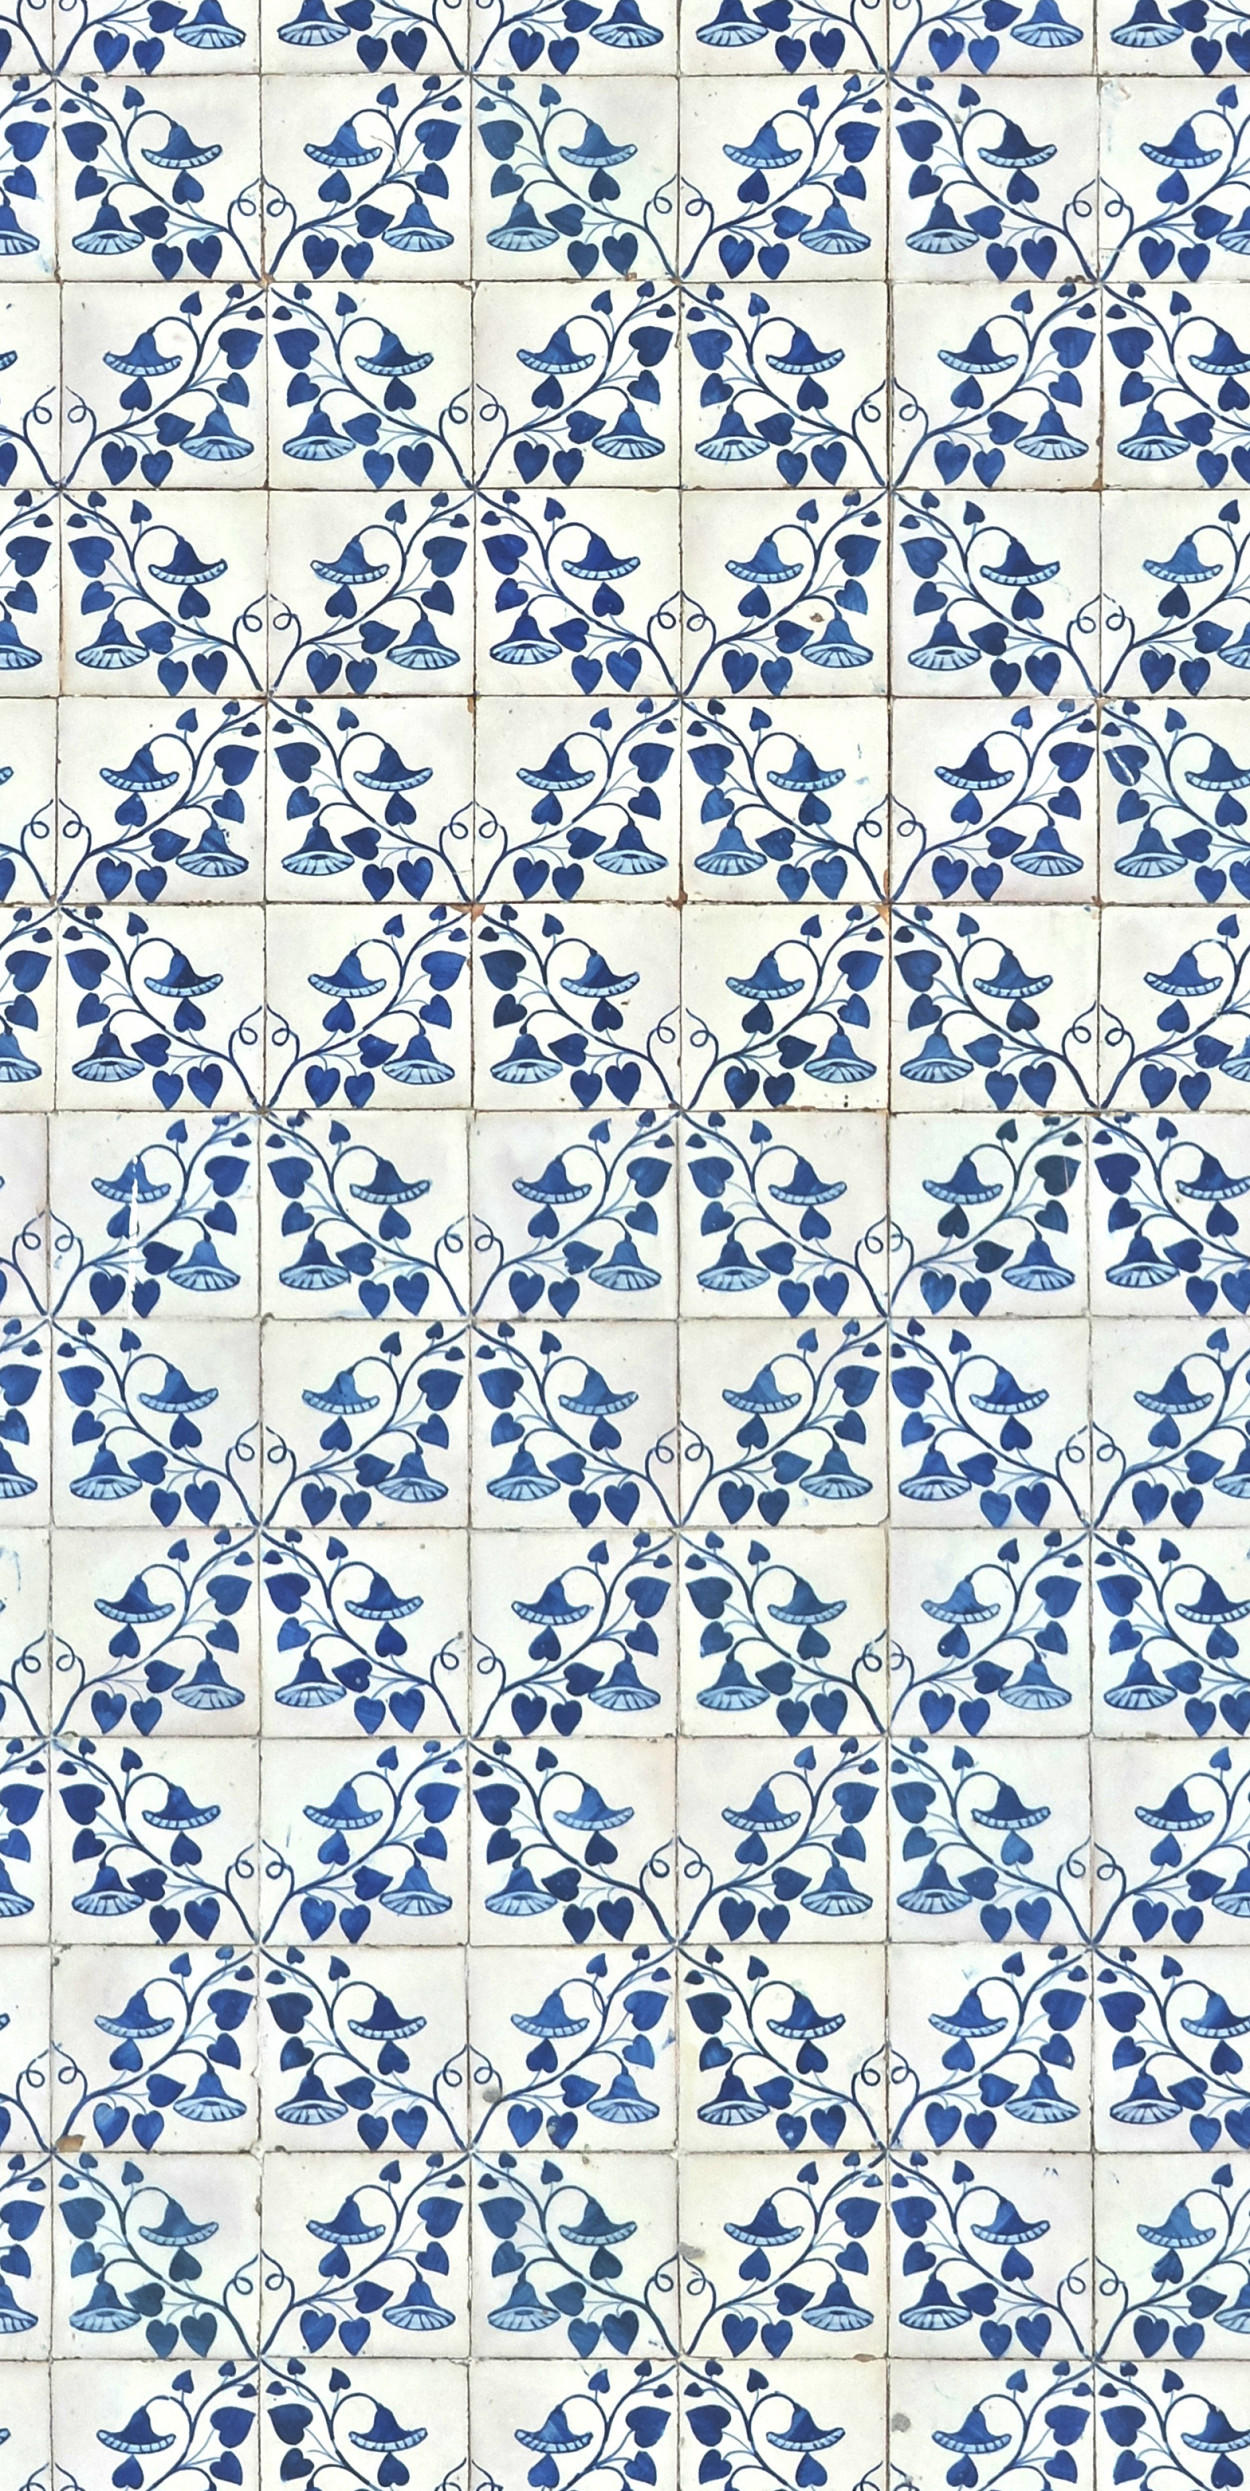 A seamless portuguese white and blue tiles texture for use in architectural drawings and 3D models